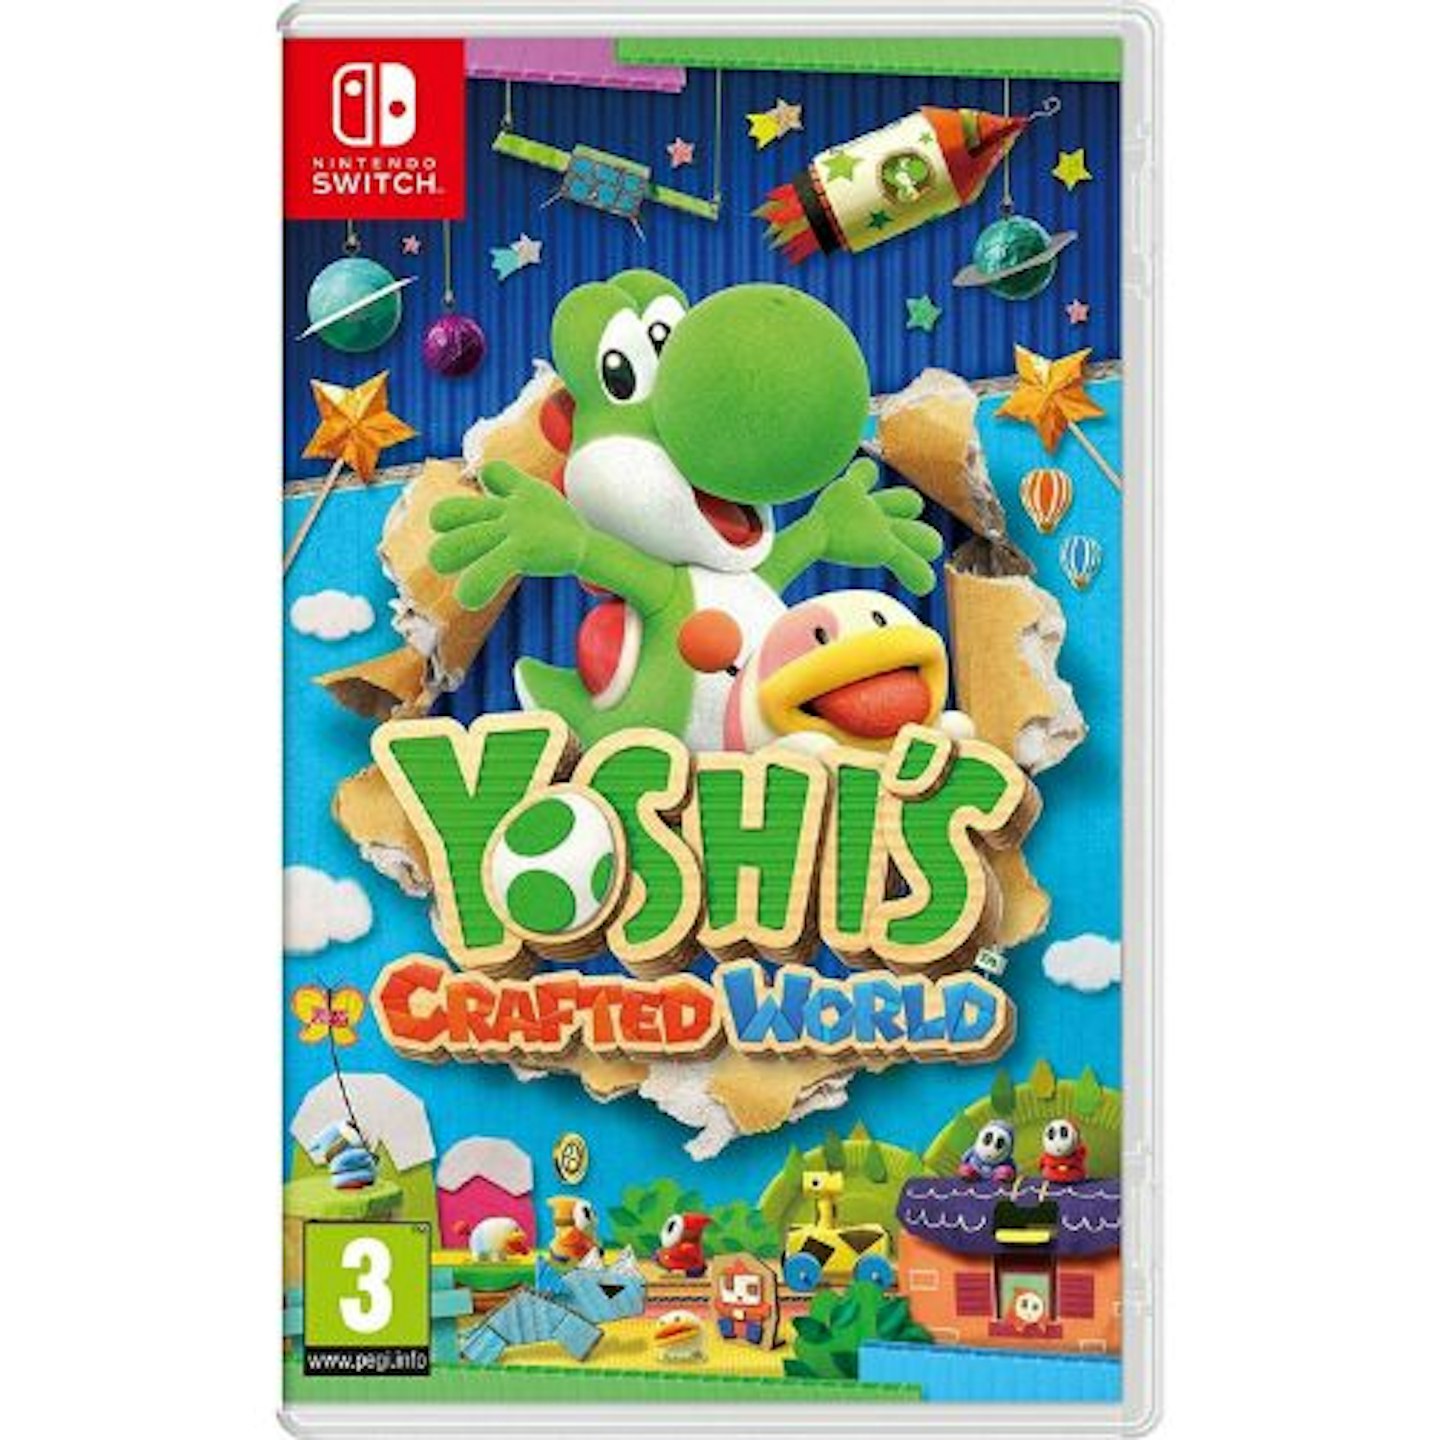 Best kid friendly switch games Yoshi's Crafted World